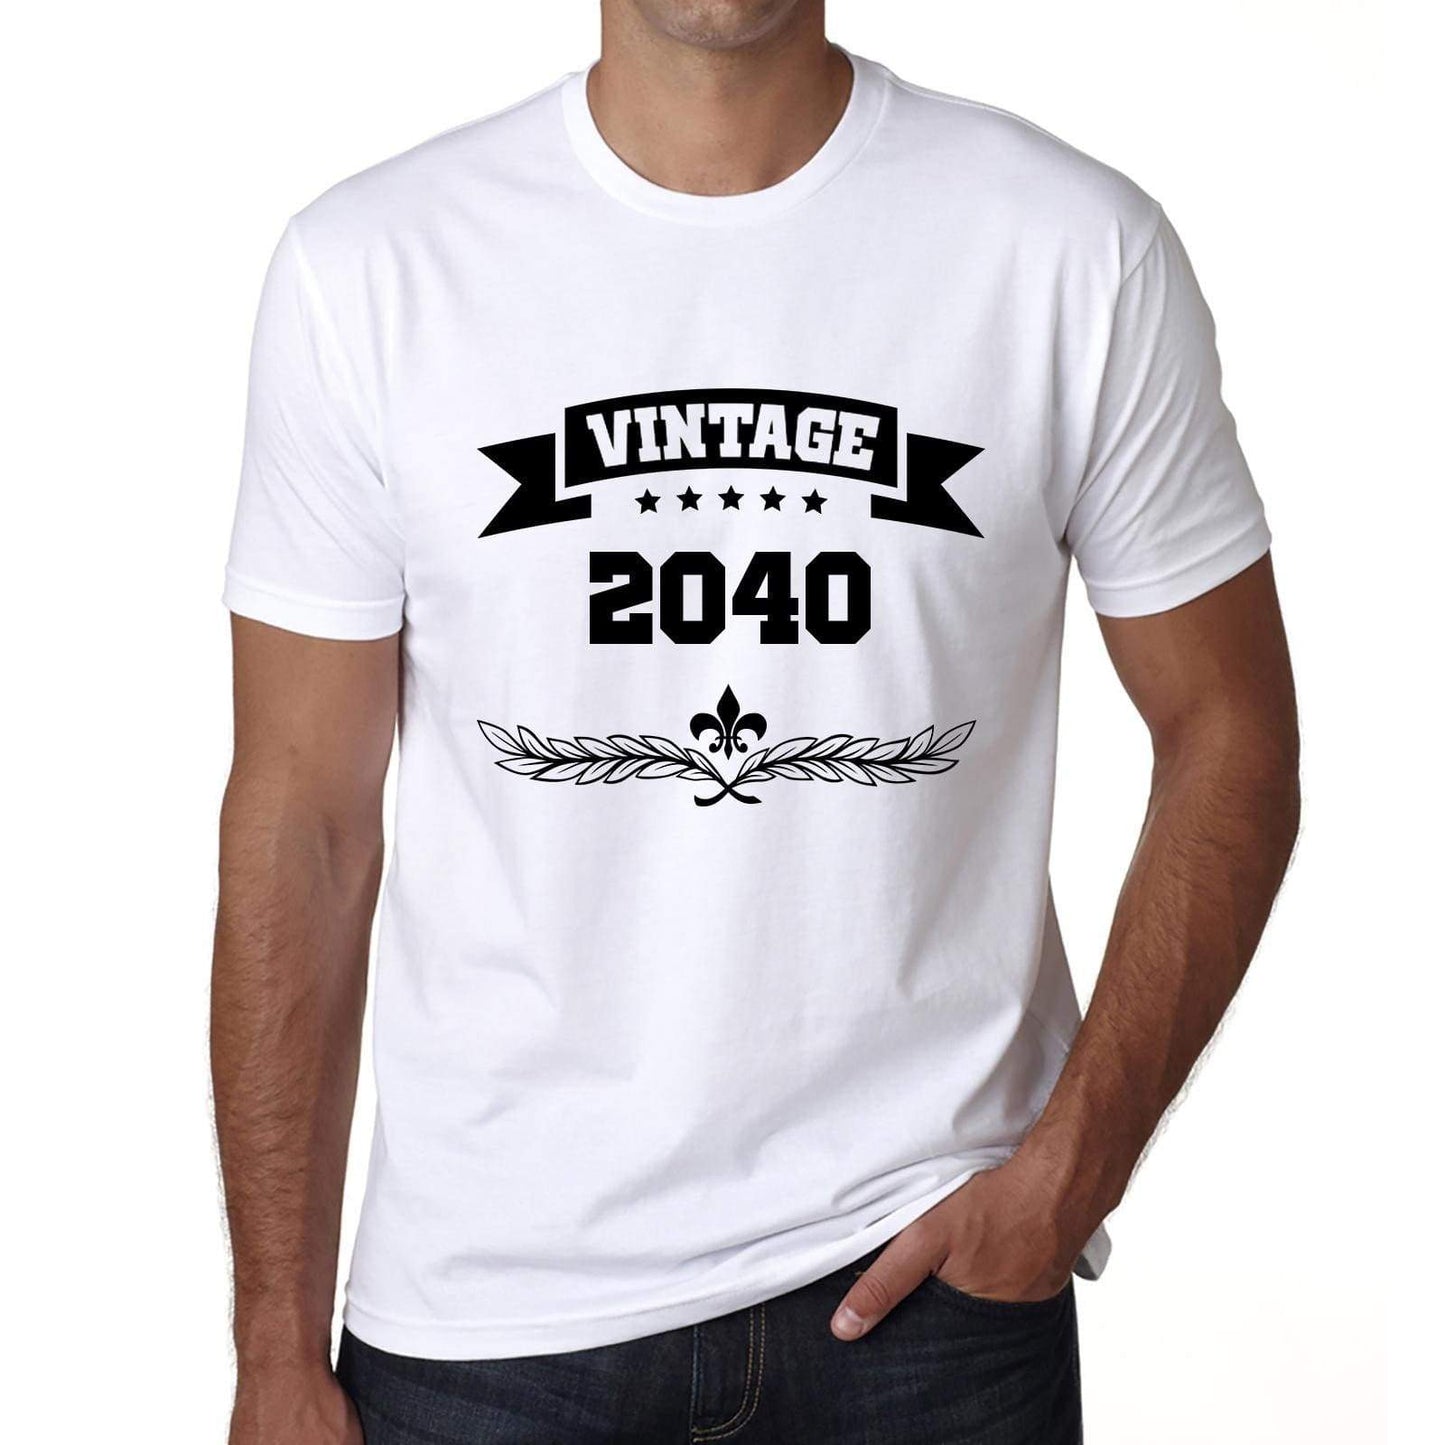 2040 Vintage Year White Mens Short Sleeve Round Neck T-Shirt 00096 - White / S - Casual